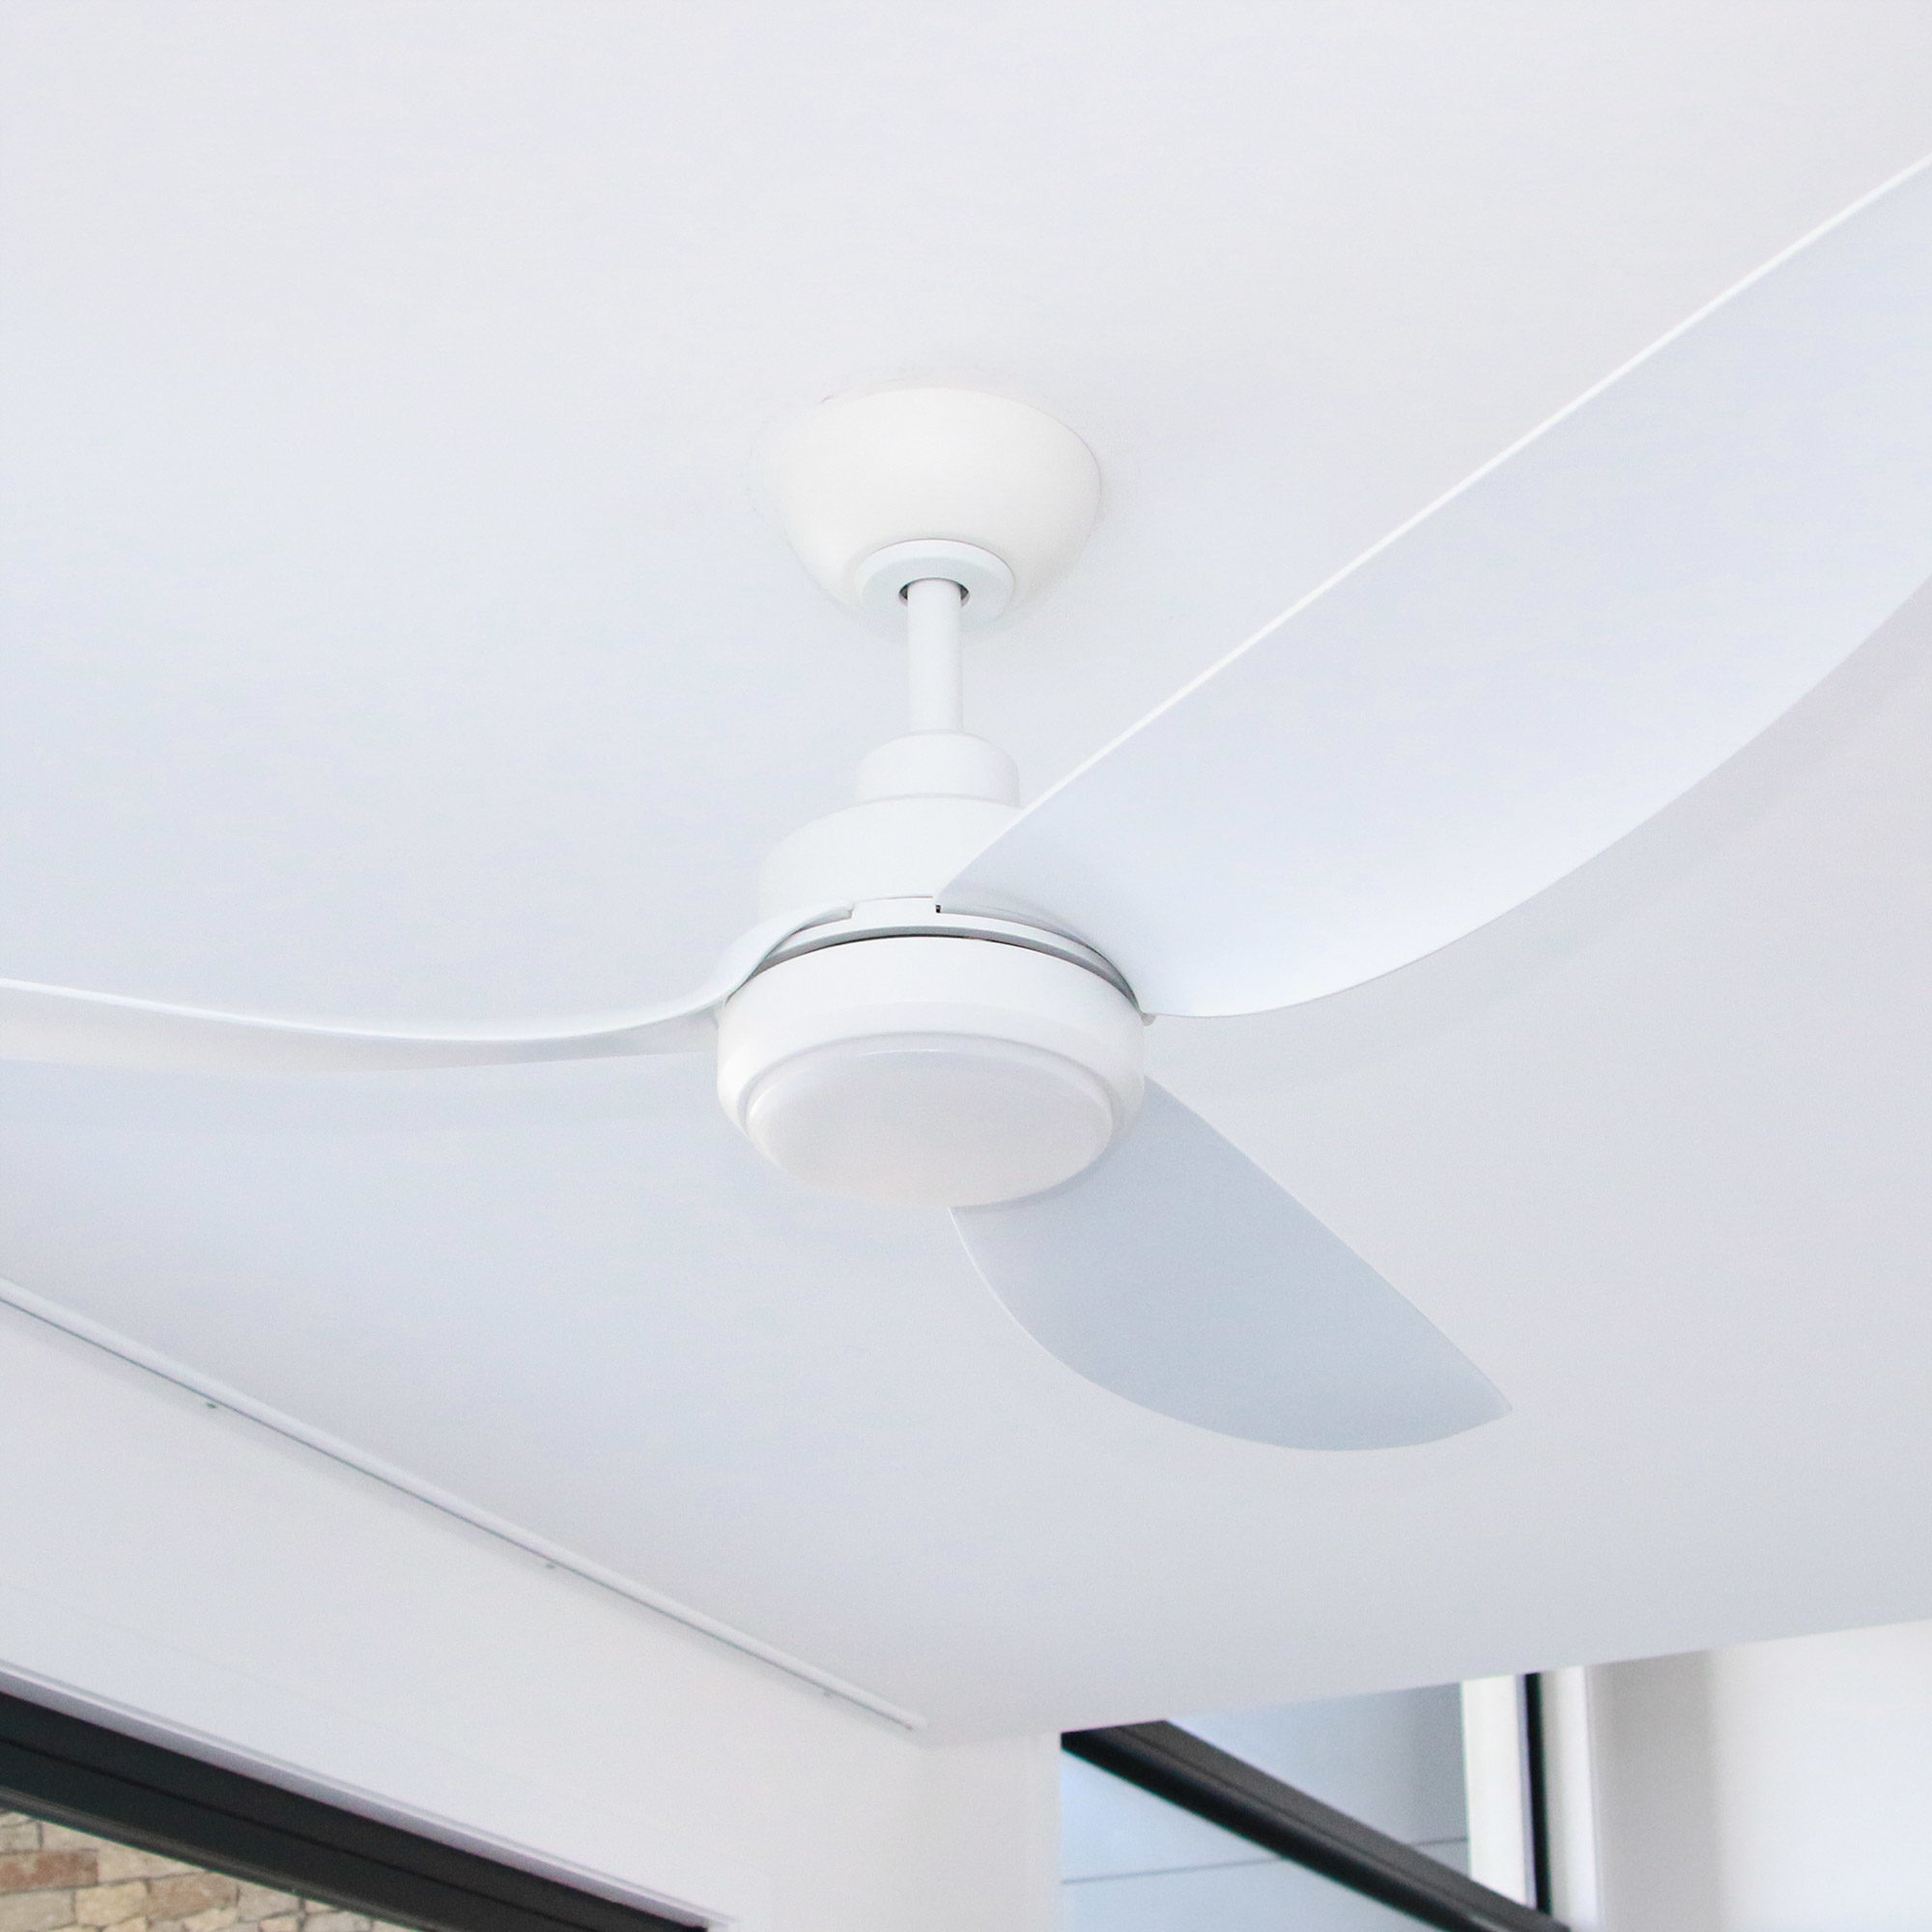 48" Trinity DC ceiling fan in Matte White with 20W LED Light Kit